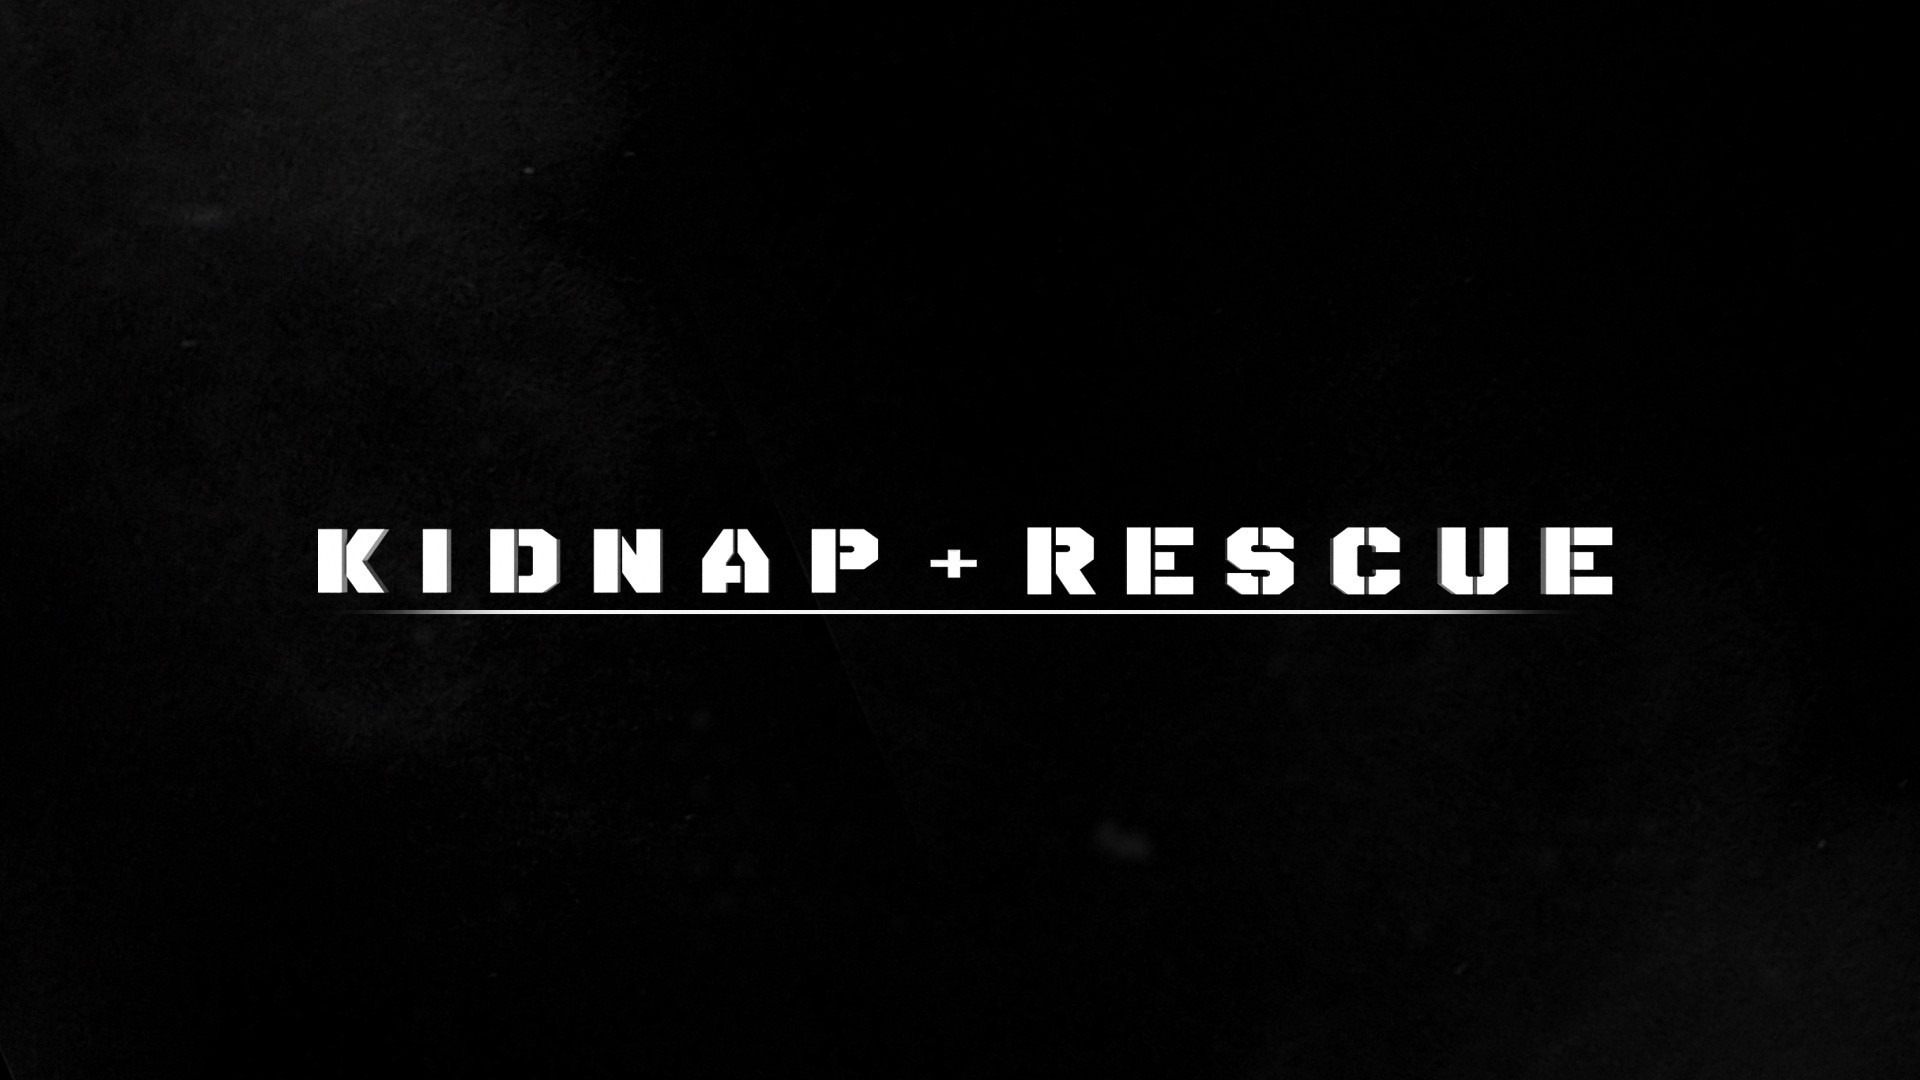 Show Kidnap & Rescue